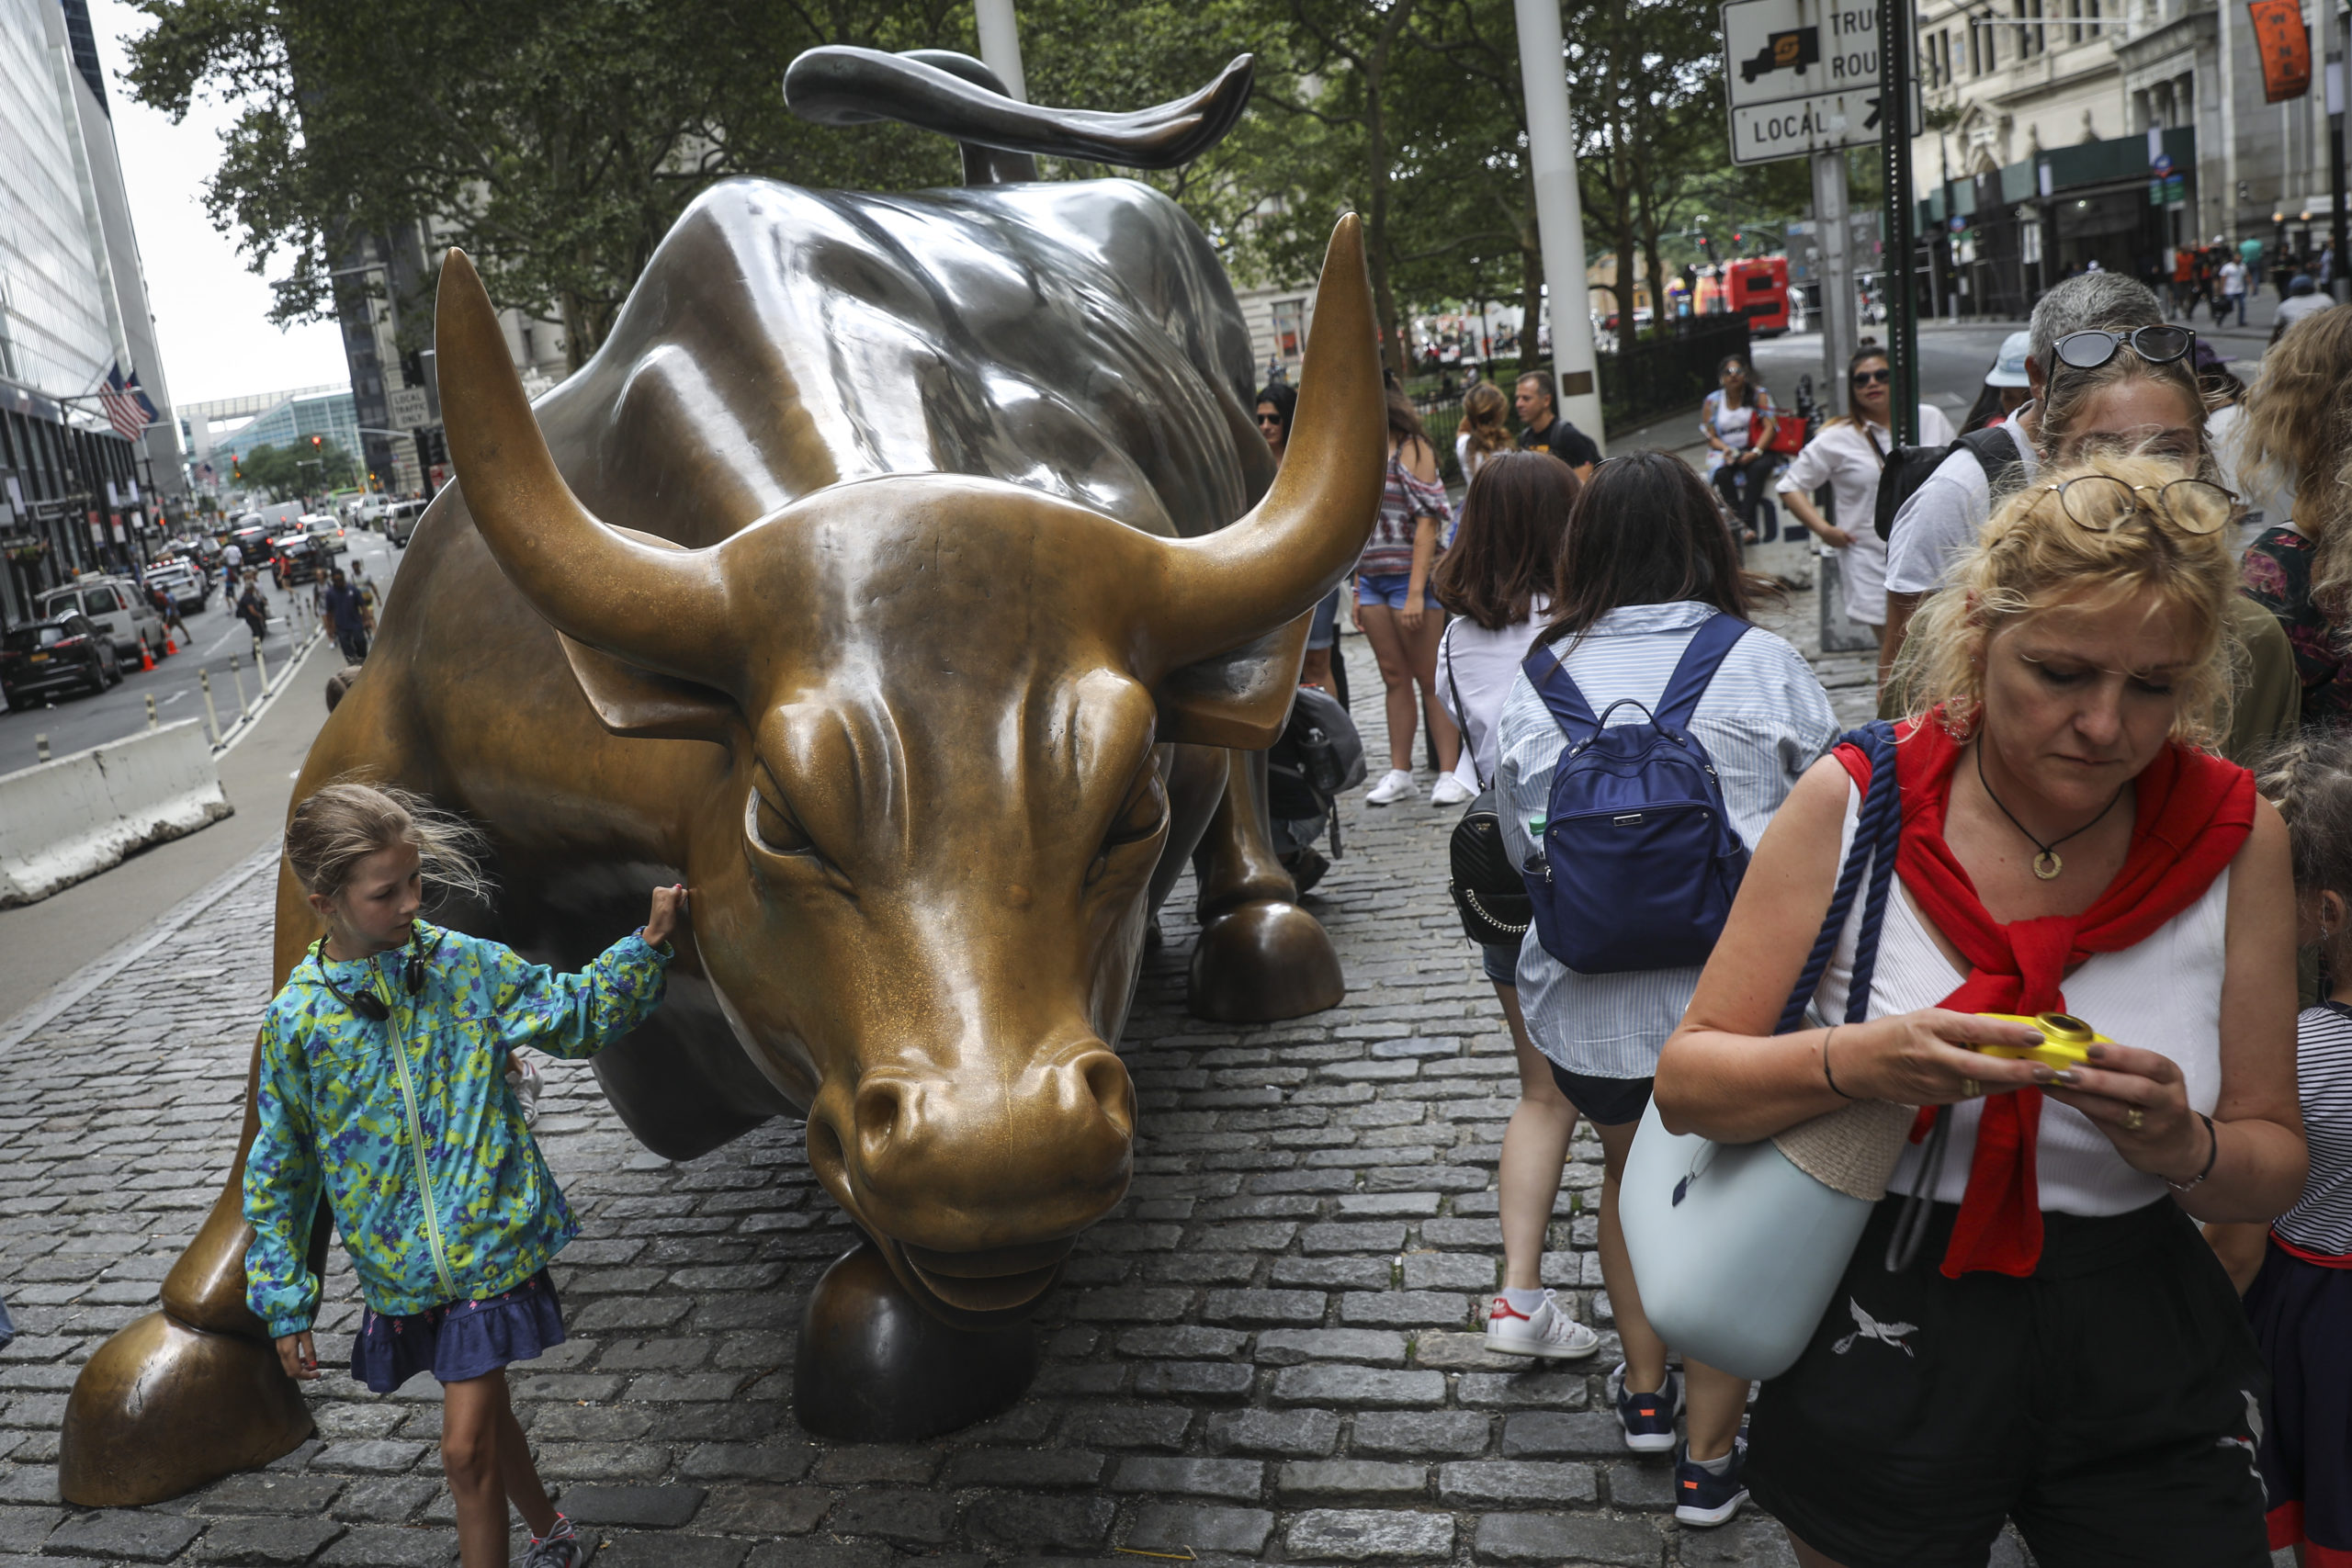 Tourists visit the Wall Street bull statue in the Financial District in New York City. (Photo by Drew Angerer/Getty Images)